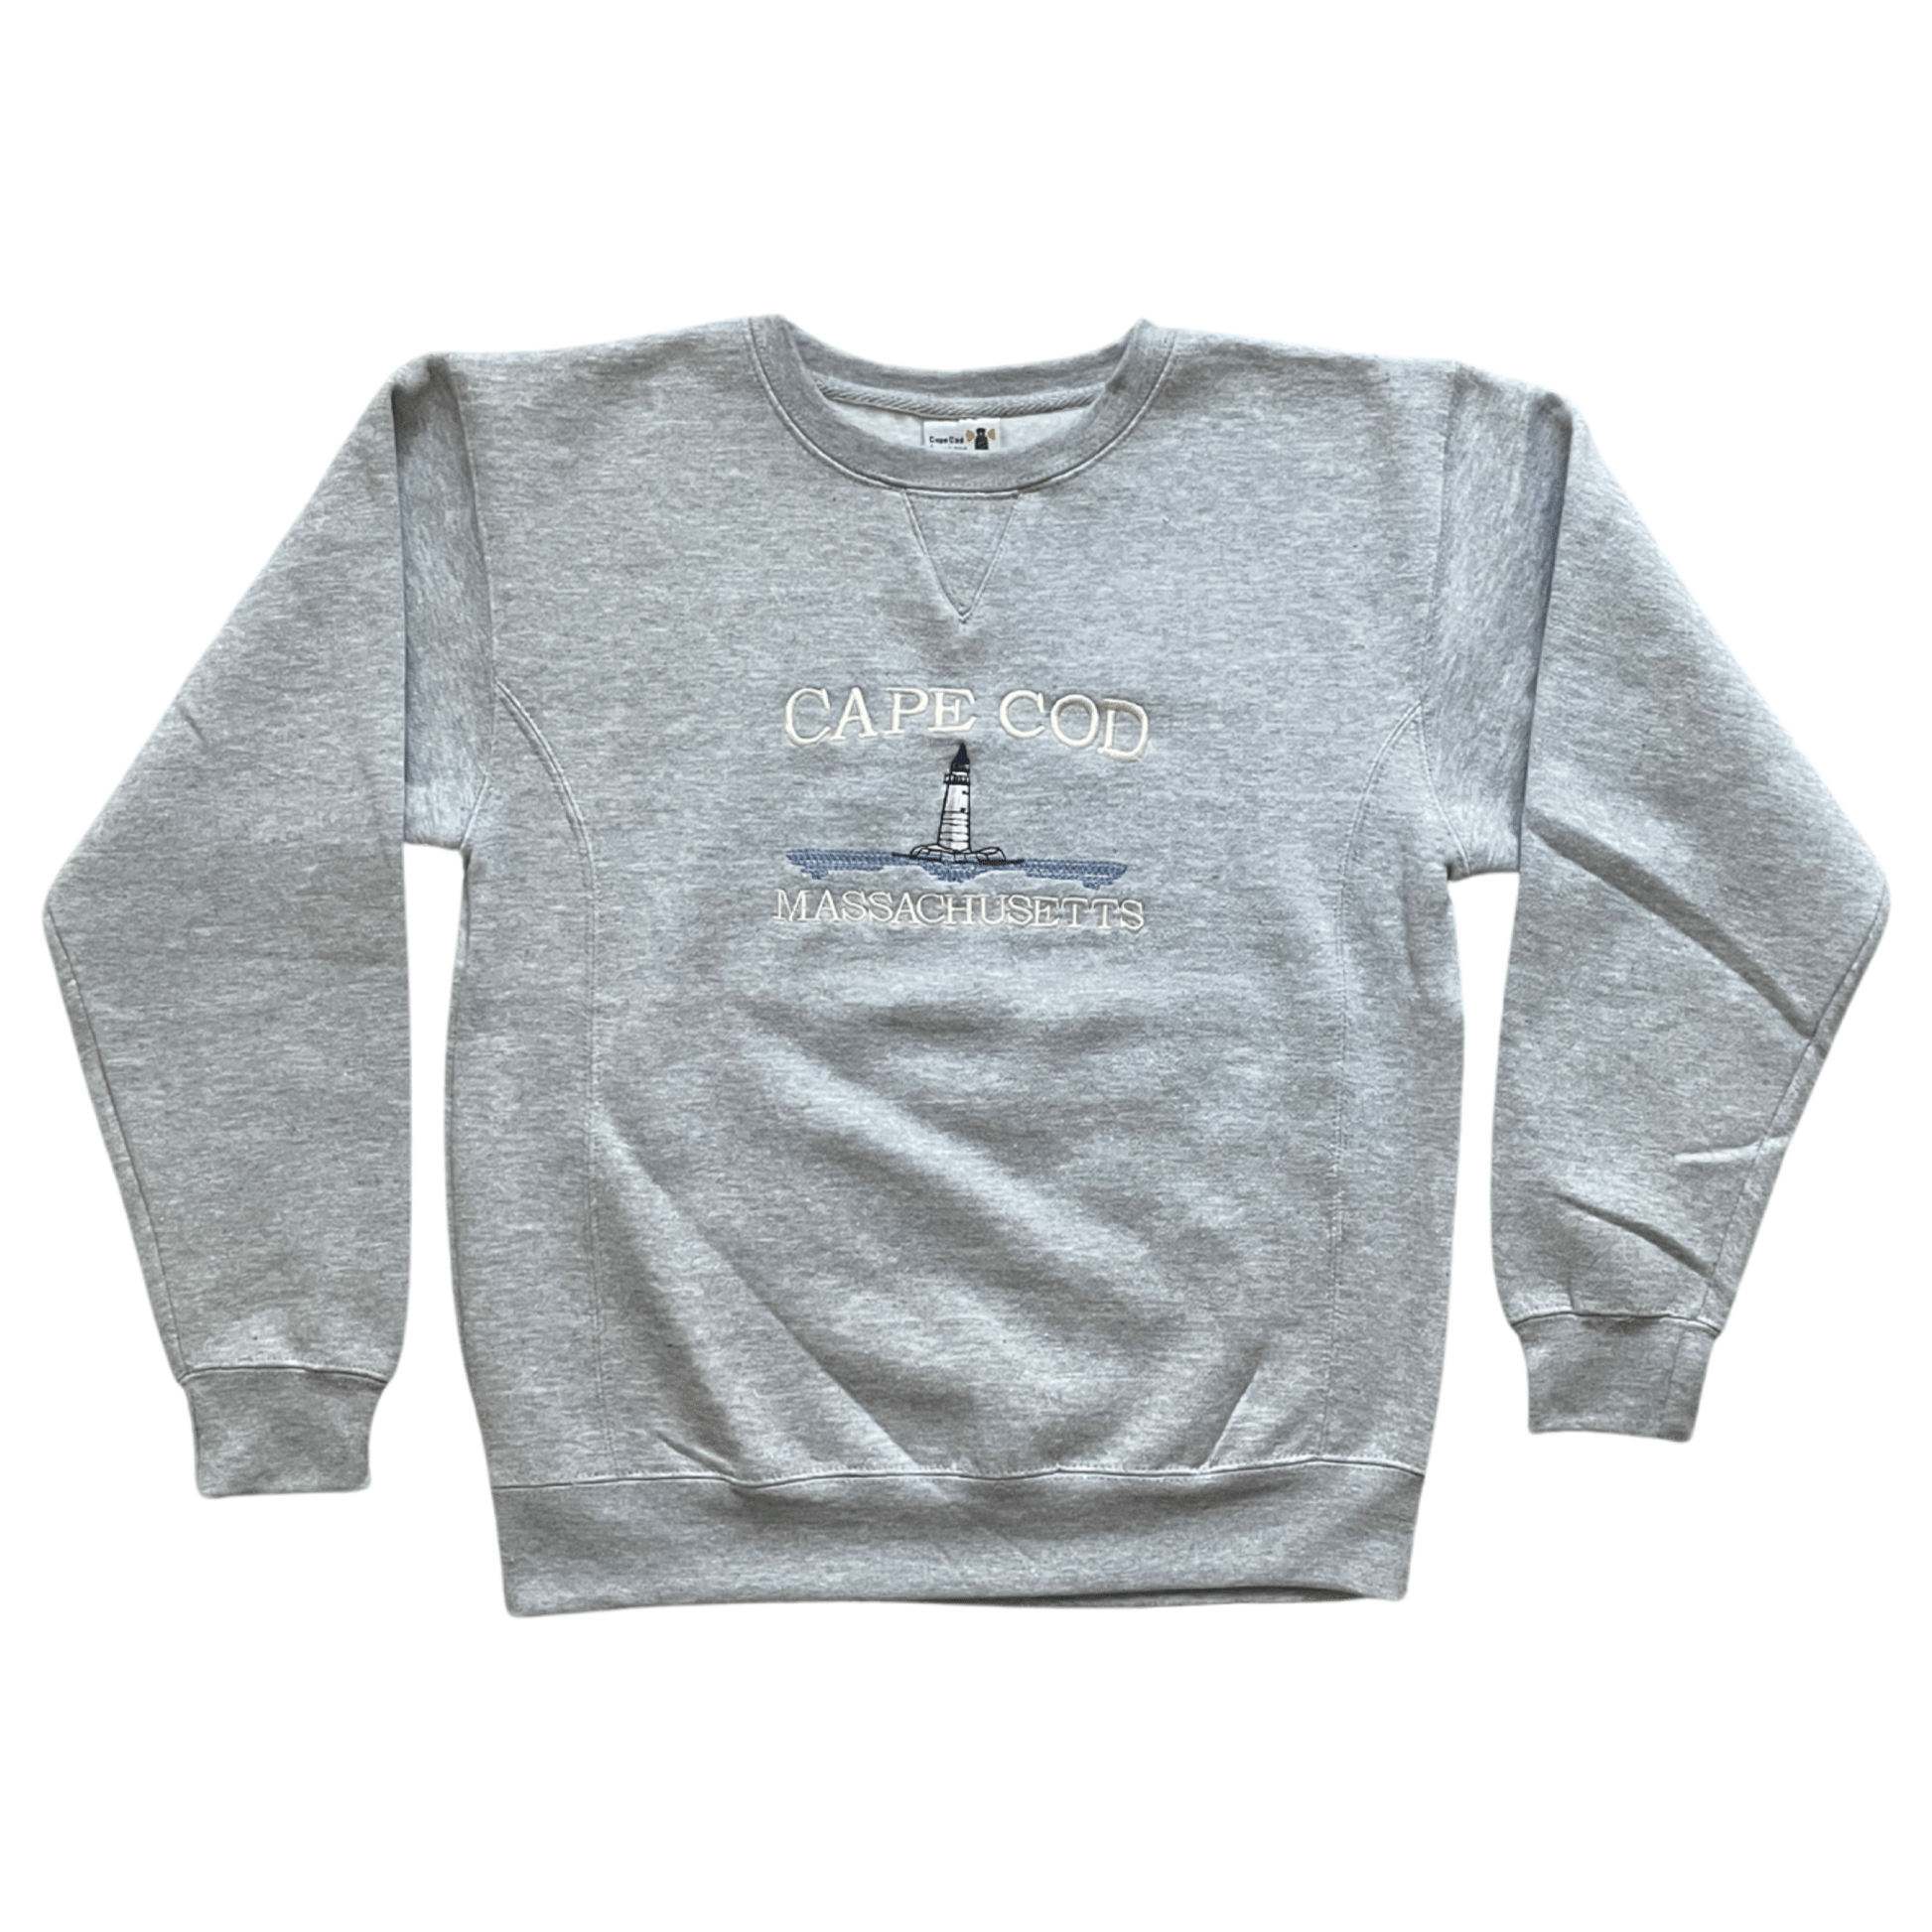 Relaxed fit embroidered crewneck sweatshirt